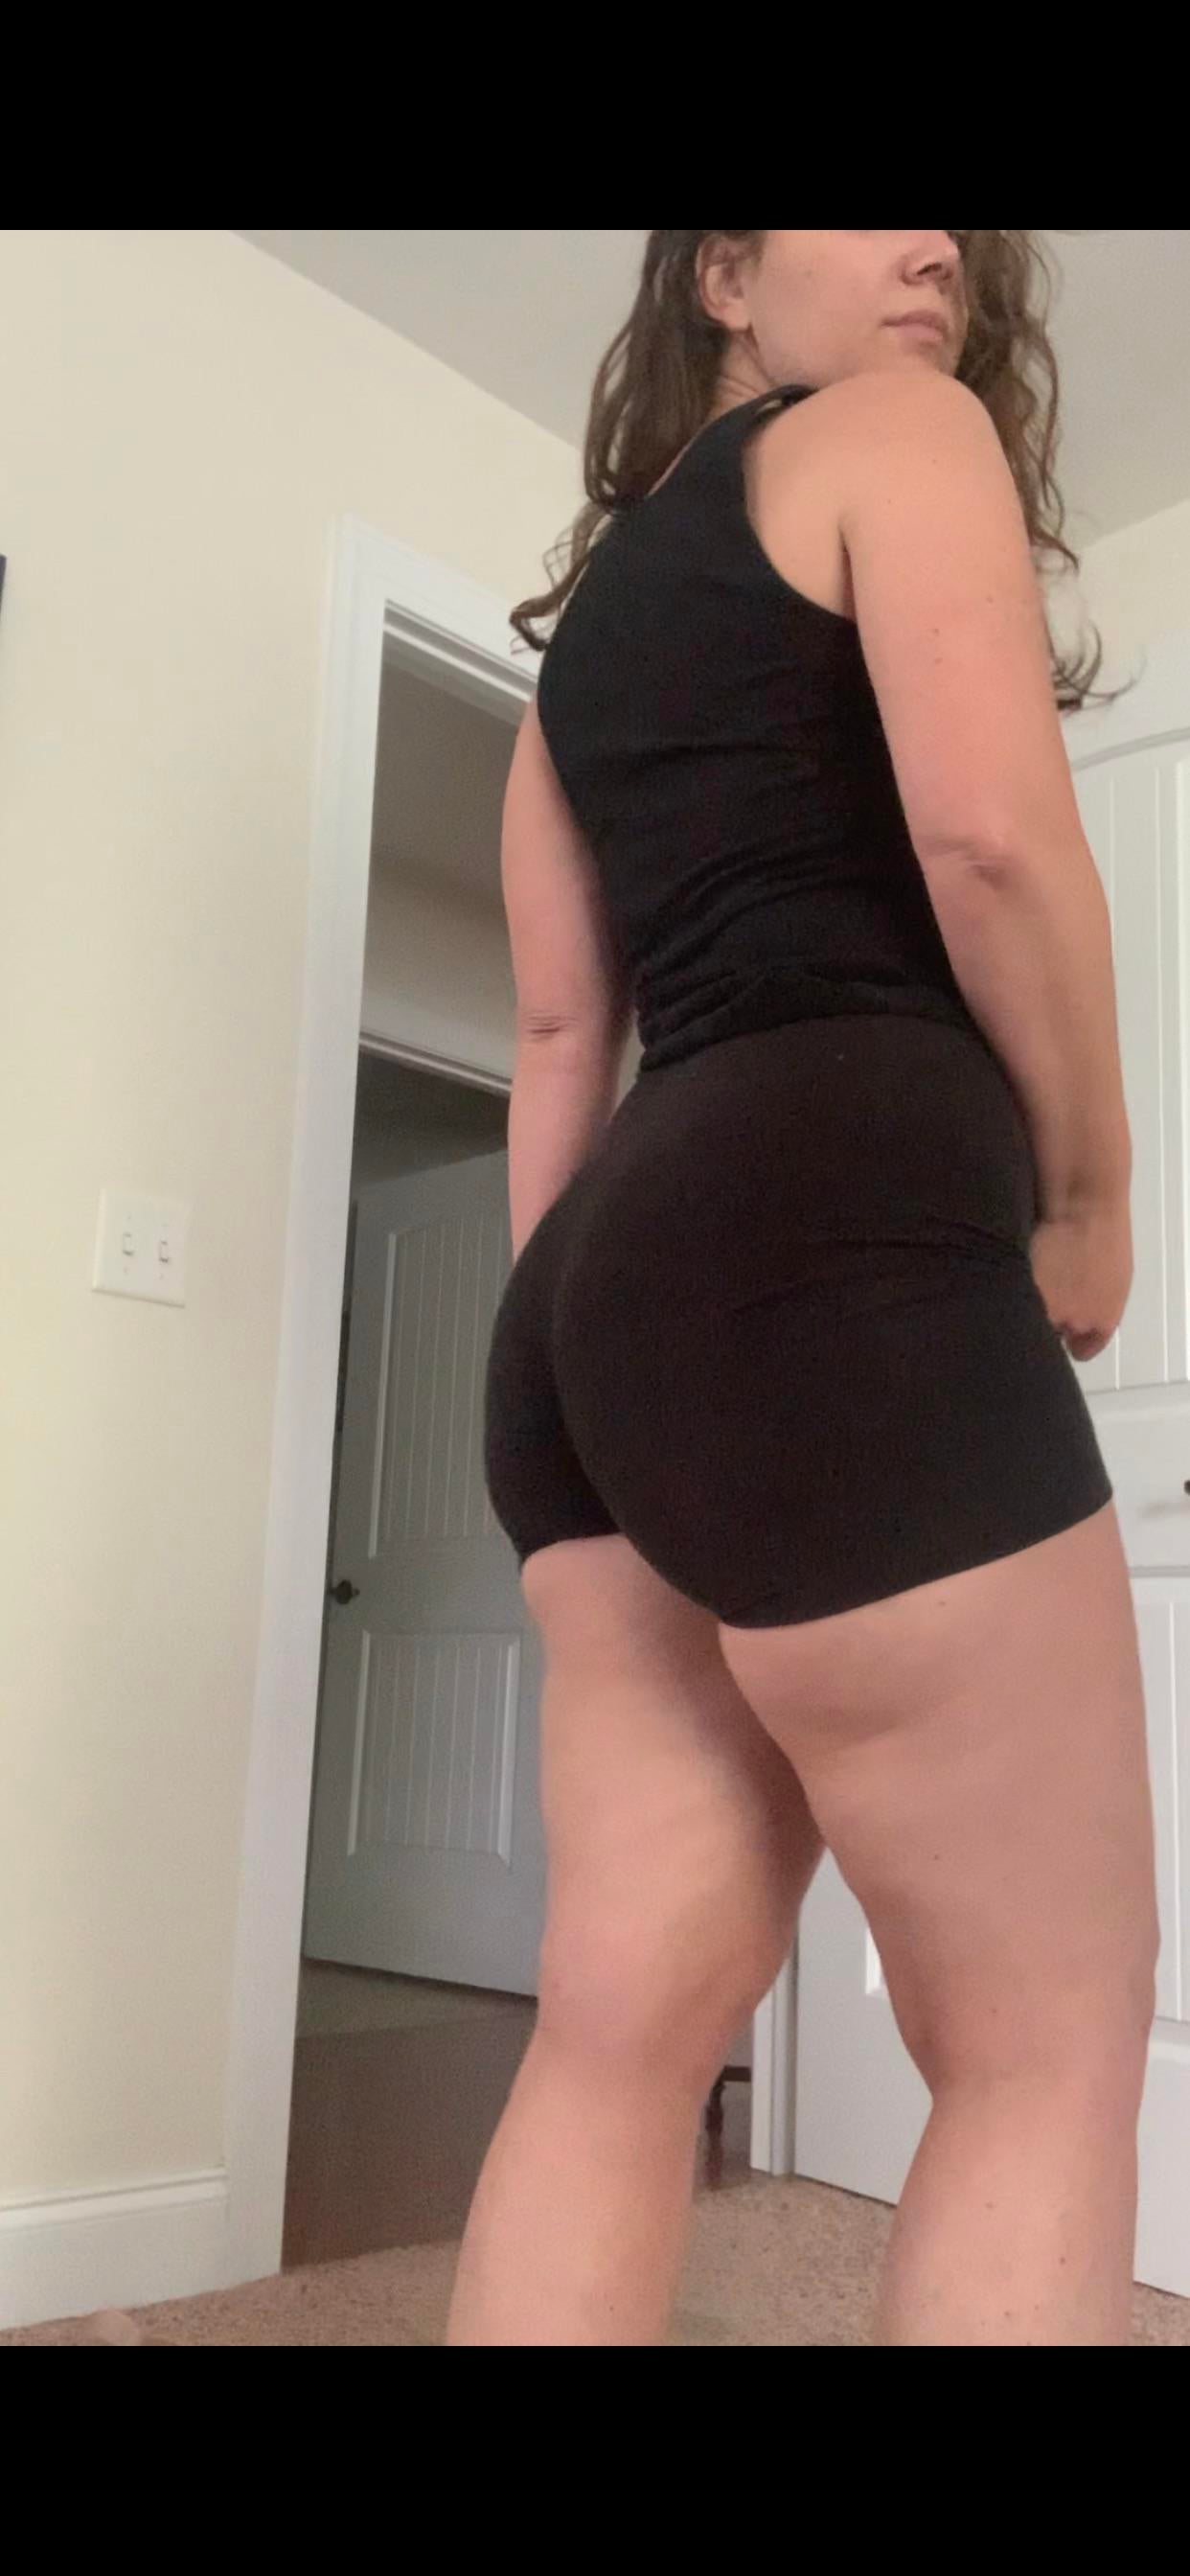 Thick thighs and ass yay or nay Thick White